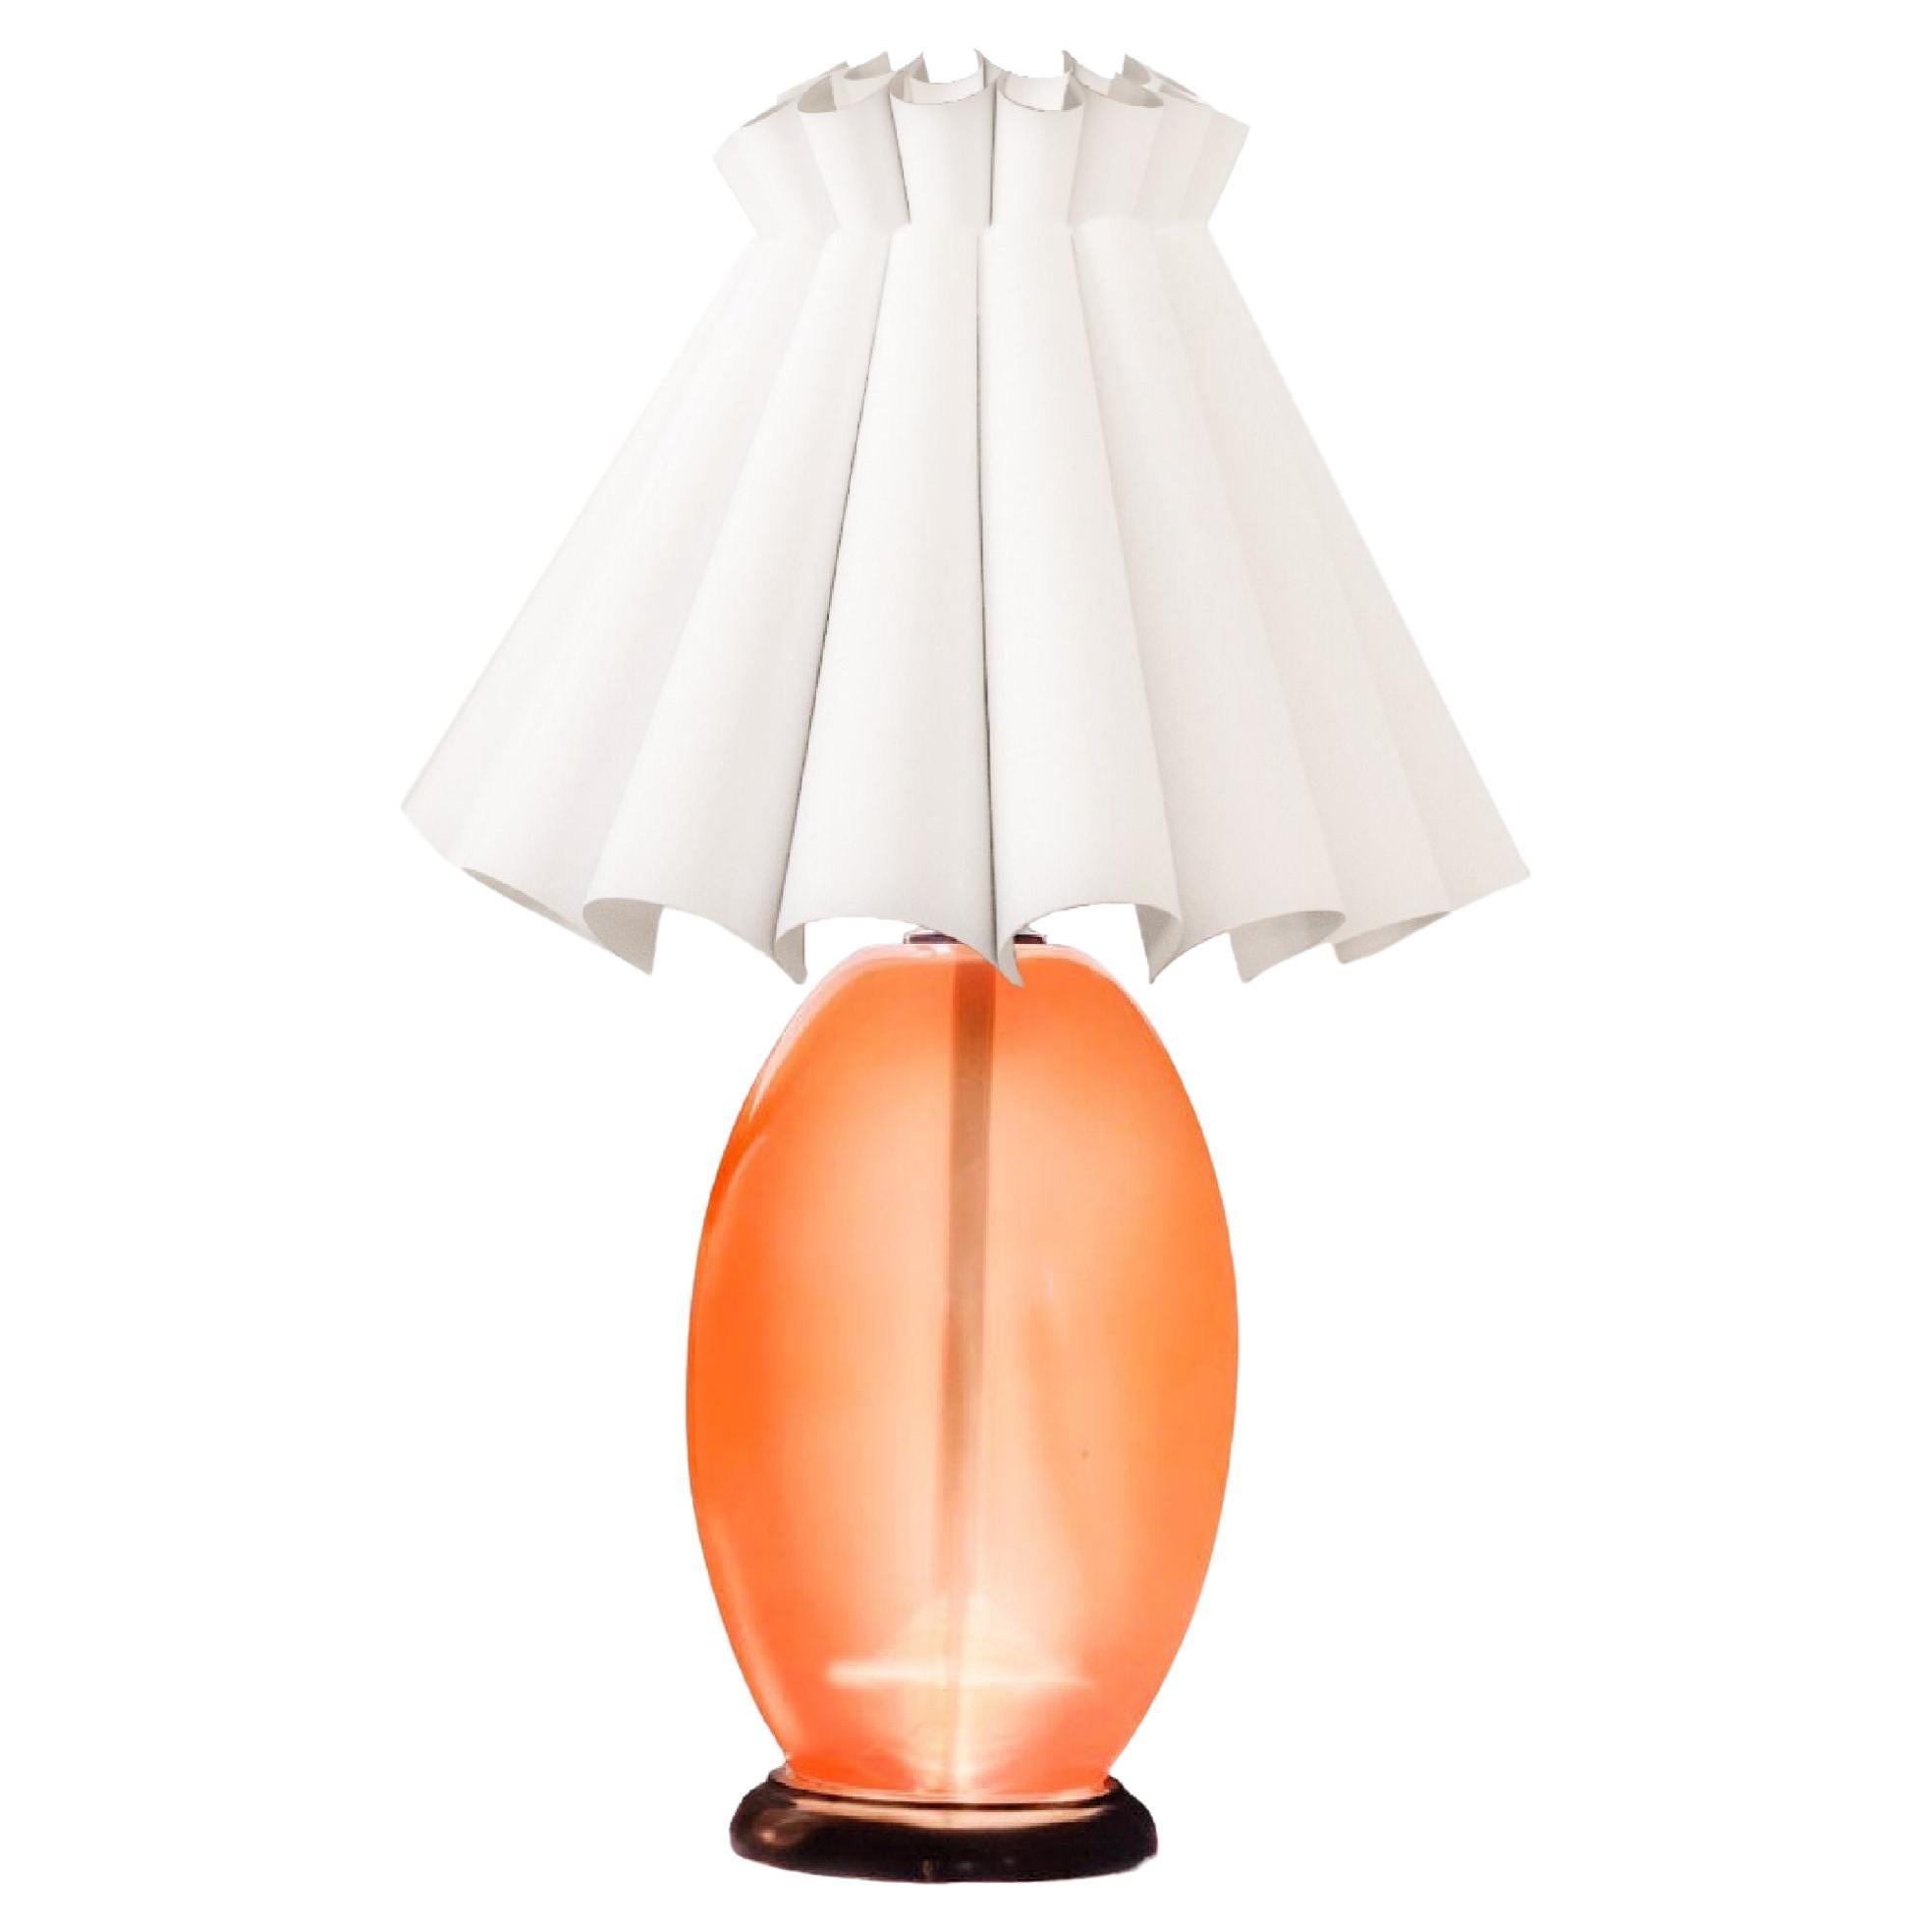 Modern Peach Lucite Midcentury Monumental Sculptural Egg Form Table Lamp For Sale